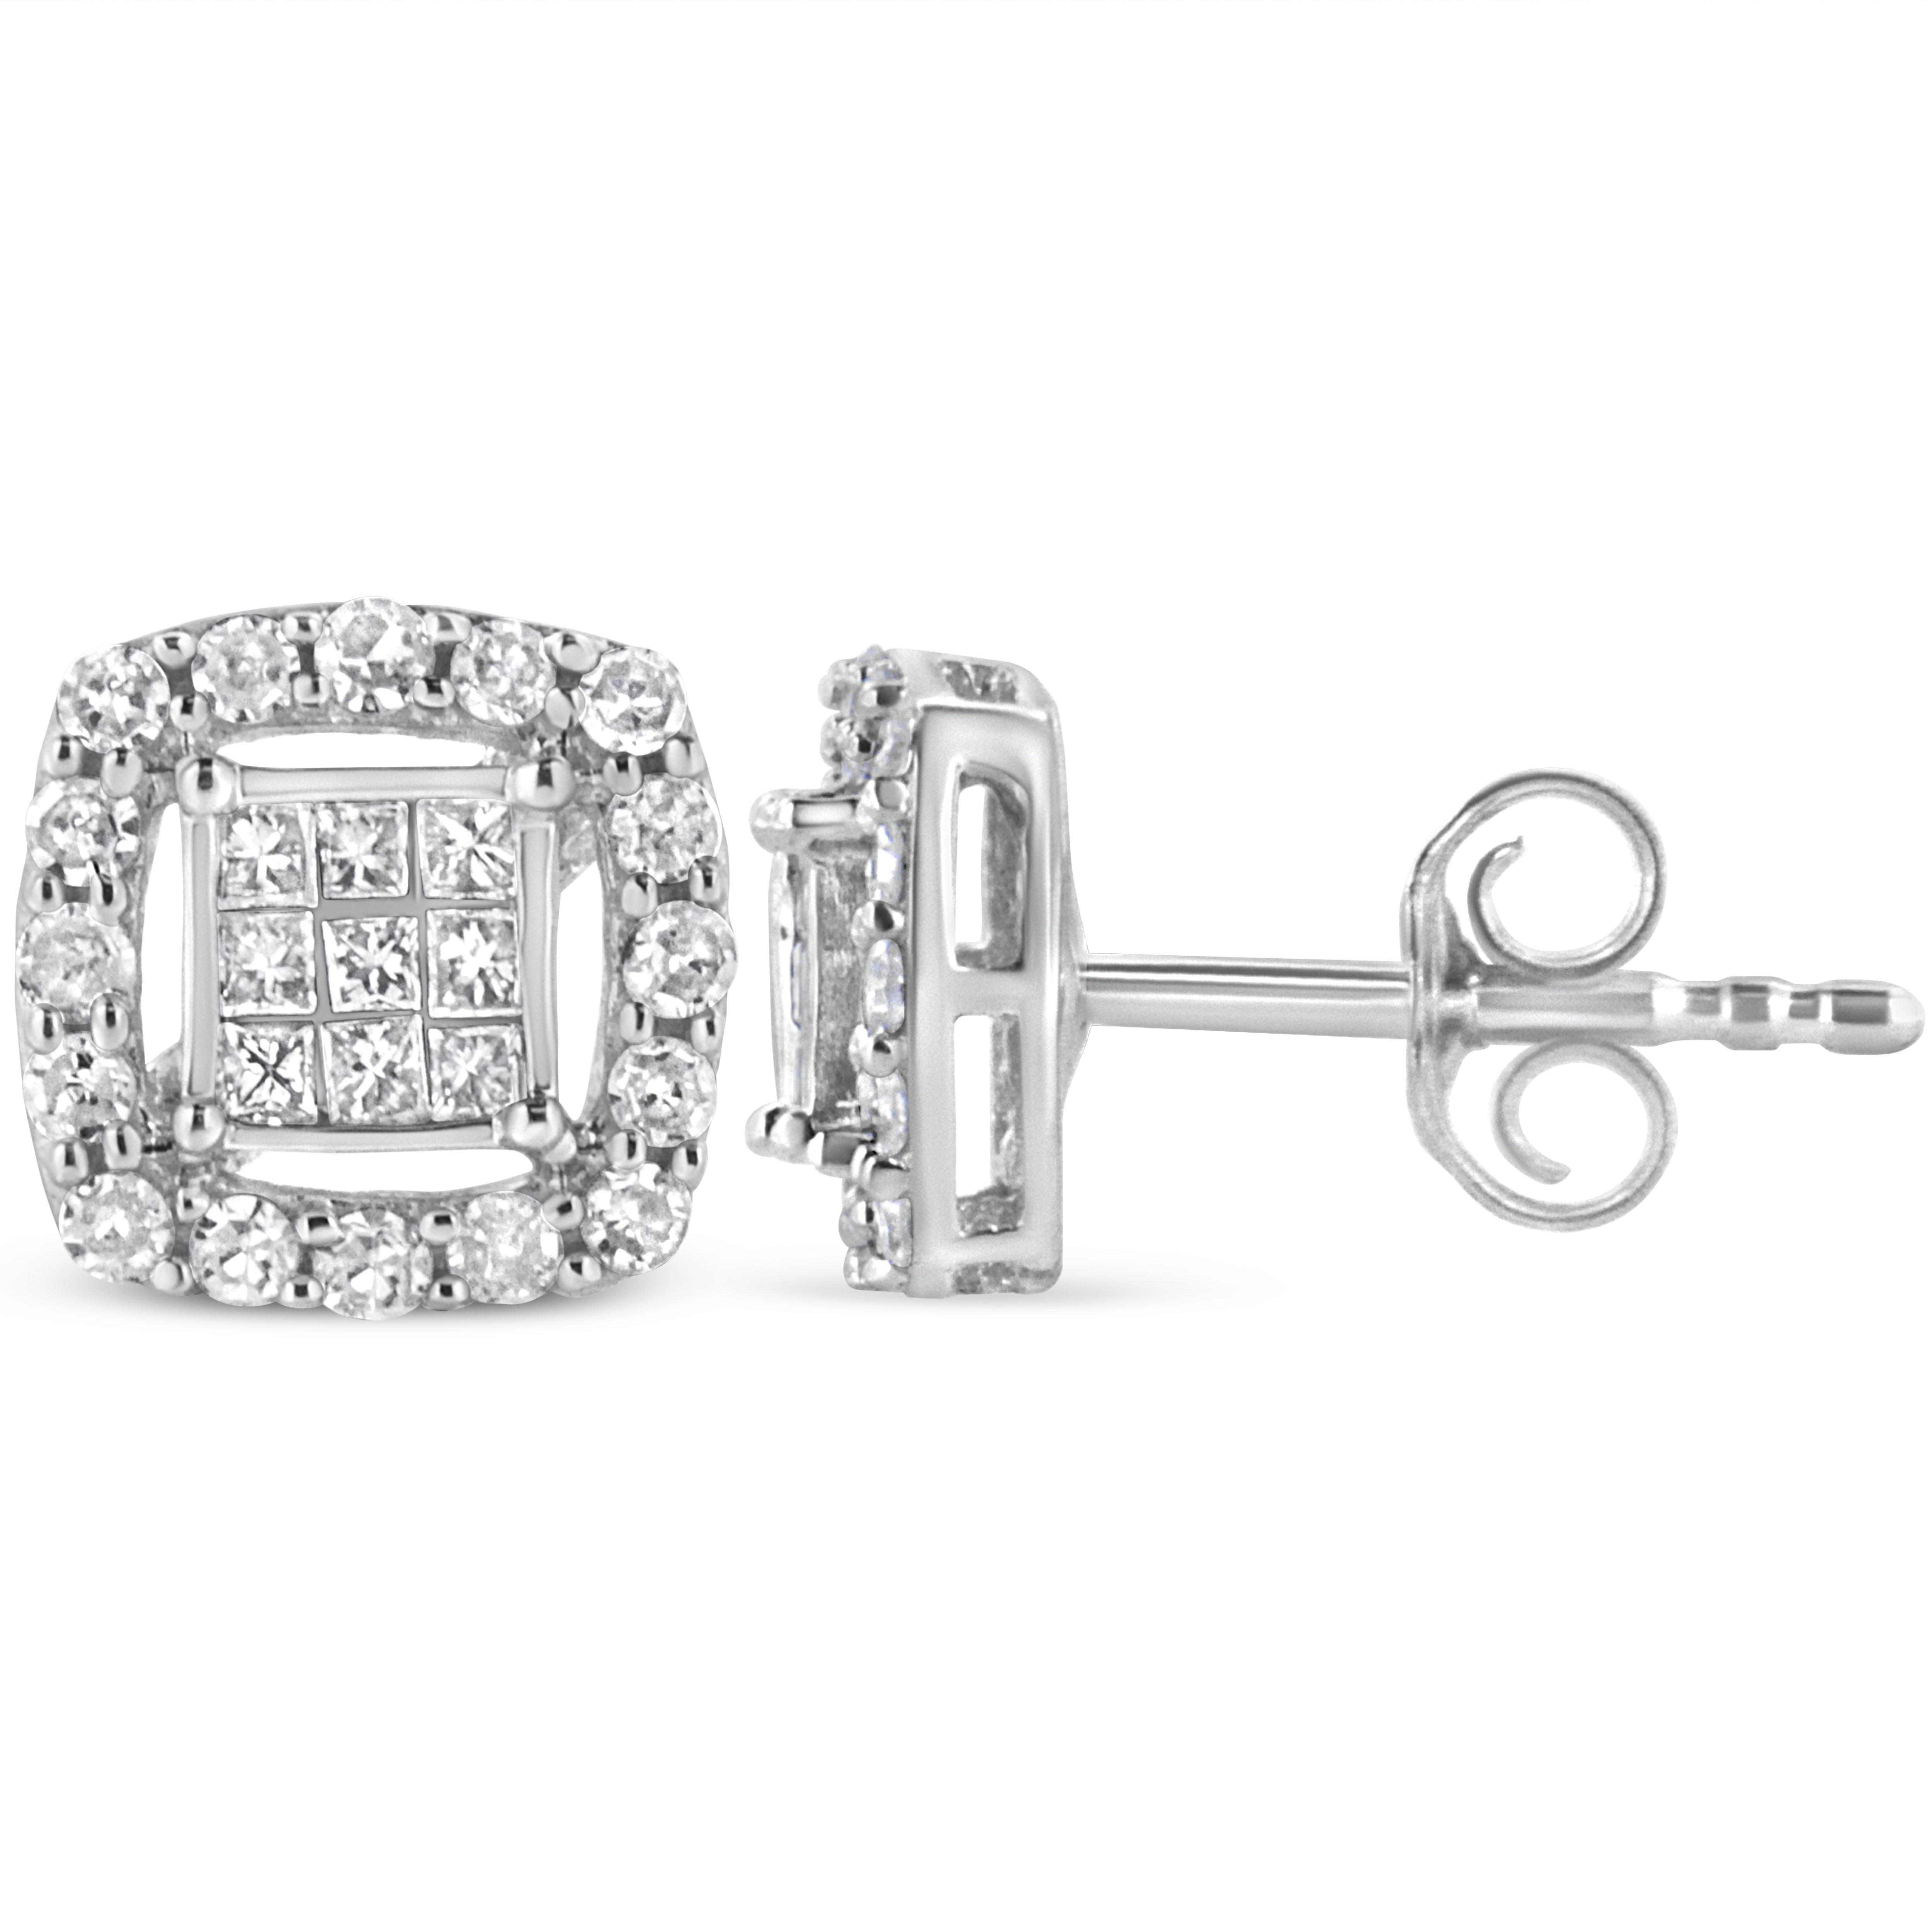 Dazzle with these glamorous stud earrings, uniquely designed with a central square motif embellished with 9 princess-cut diamonds in an elegant prong setting. The central motif is framed by a halo of round-cut diamonds, giving the whole piece a